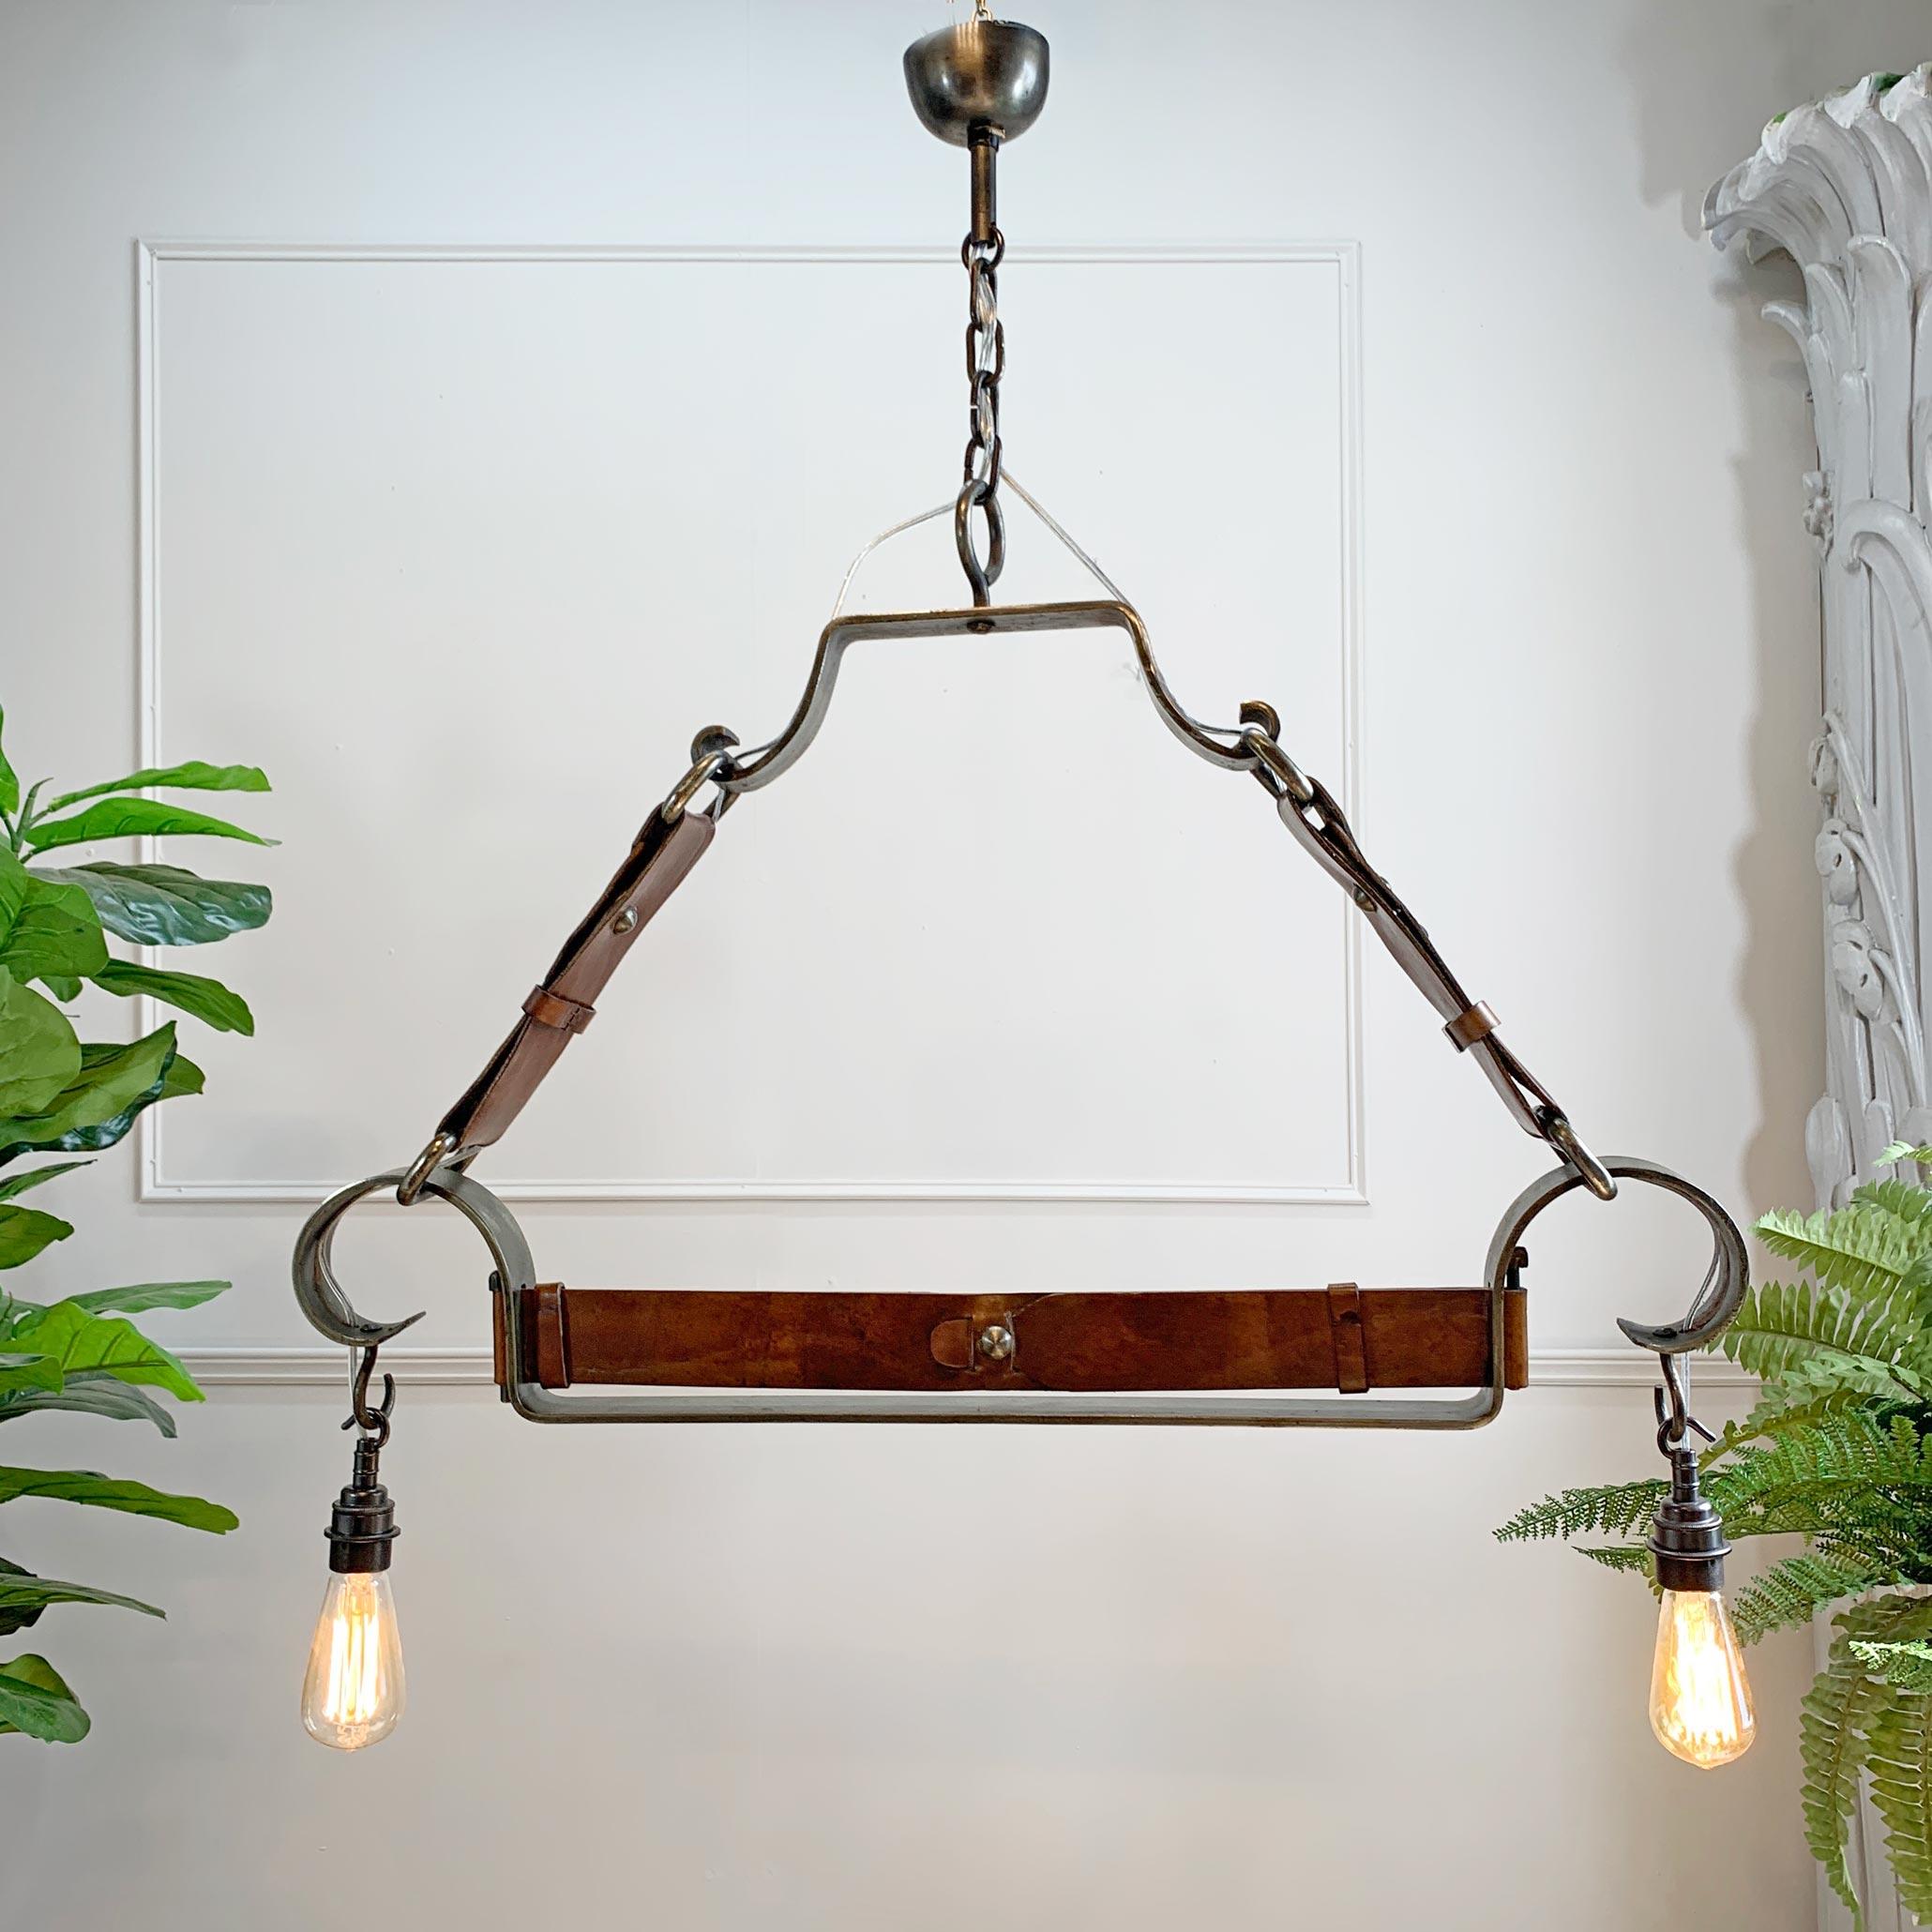 Hand-Crafted Jean-Pierre Ryckaert Tan Leather Strap and Steel Ceiling Pendant Light For Sale